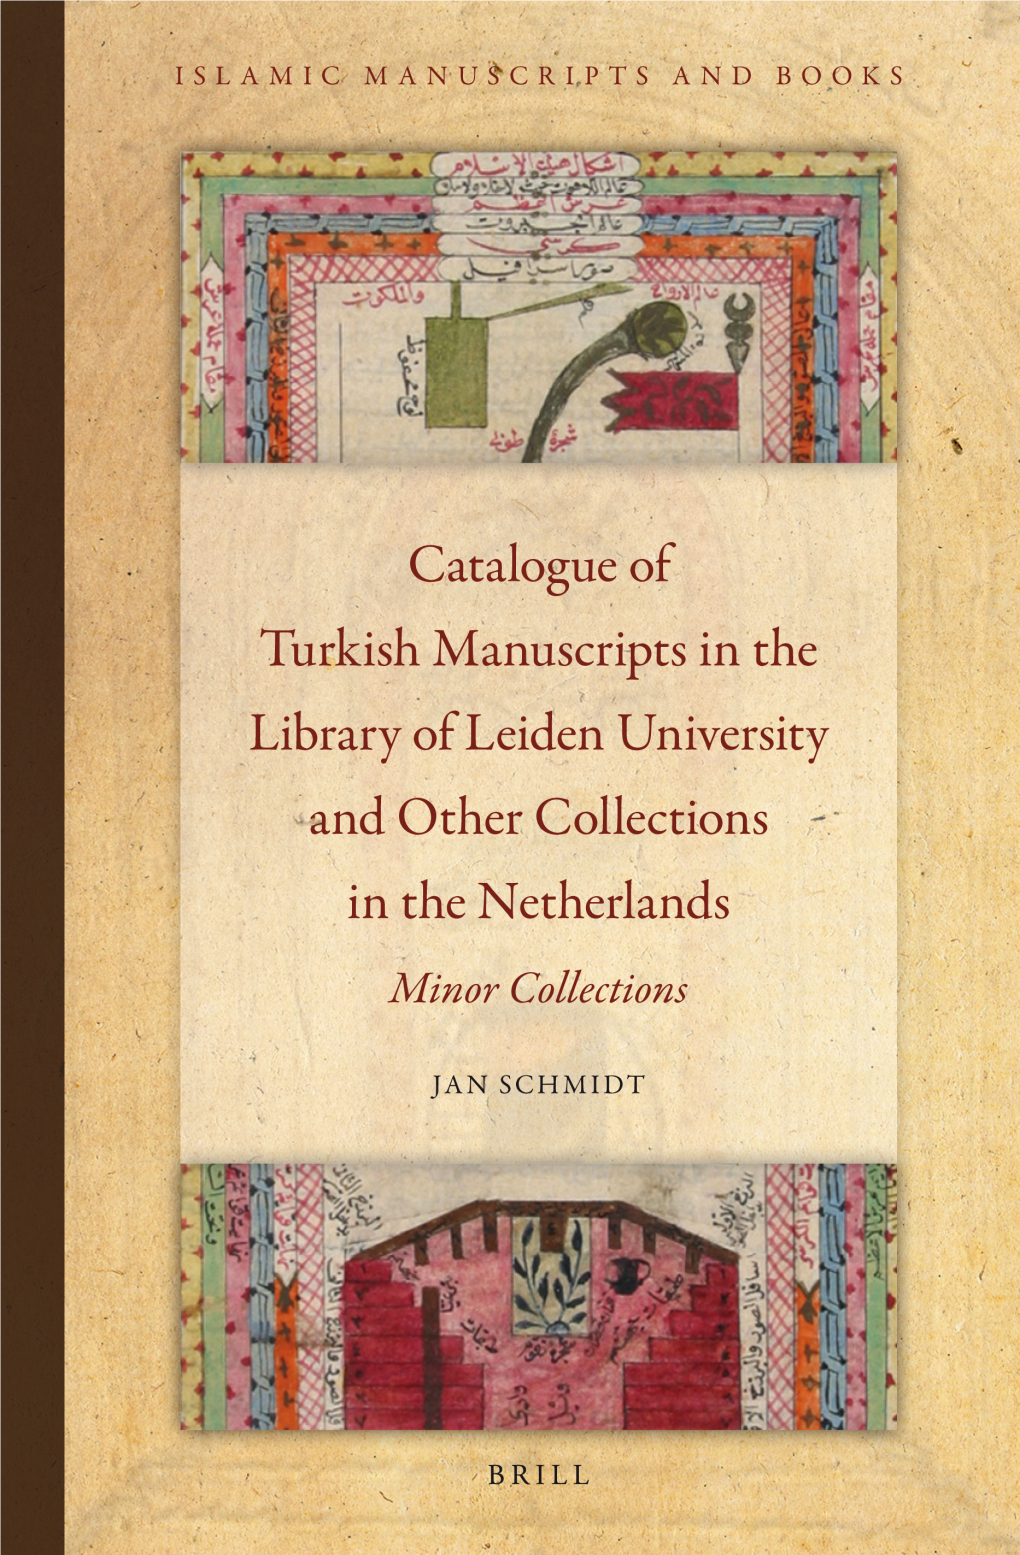 Catalogue of Turkish Manuscripts in the Library of Leiden University and Other Collections in the Netherlands Islamic Manuscripts and Books